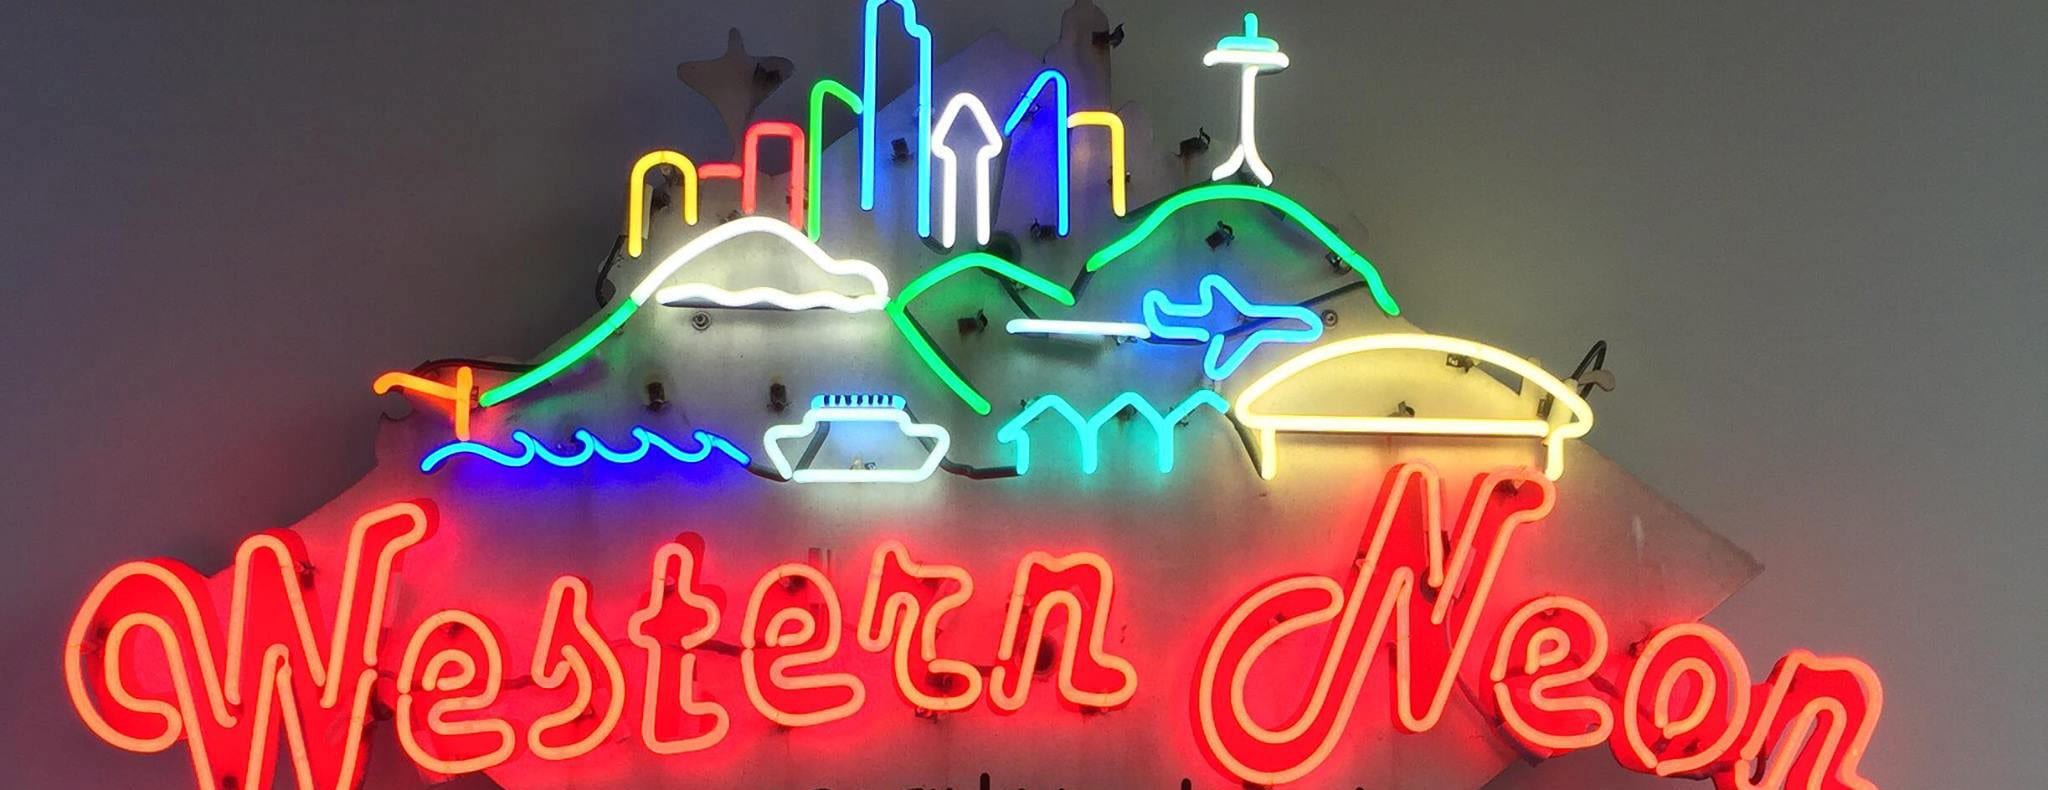 Western Neon's own neon sign, which depicts Mount Rainier, the Seattle Skyline, a jet, CenturyLink Field, and a boat on the water.